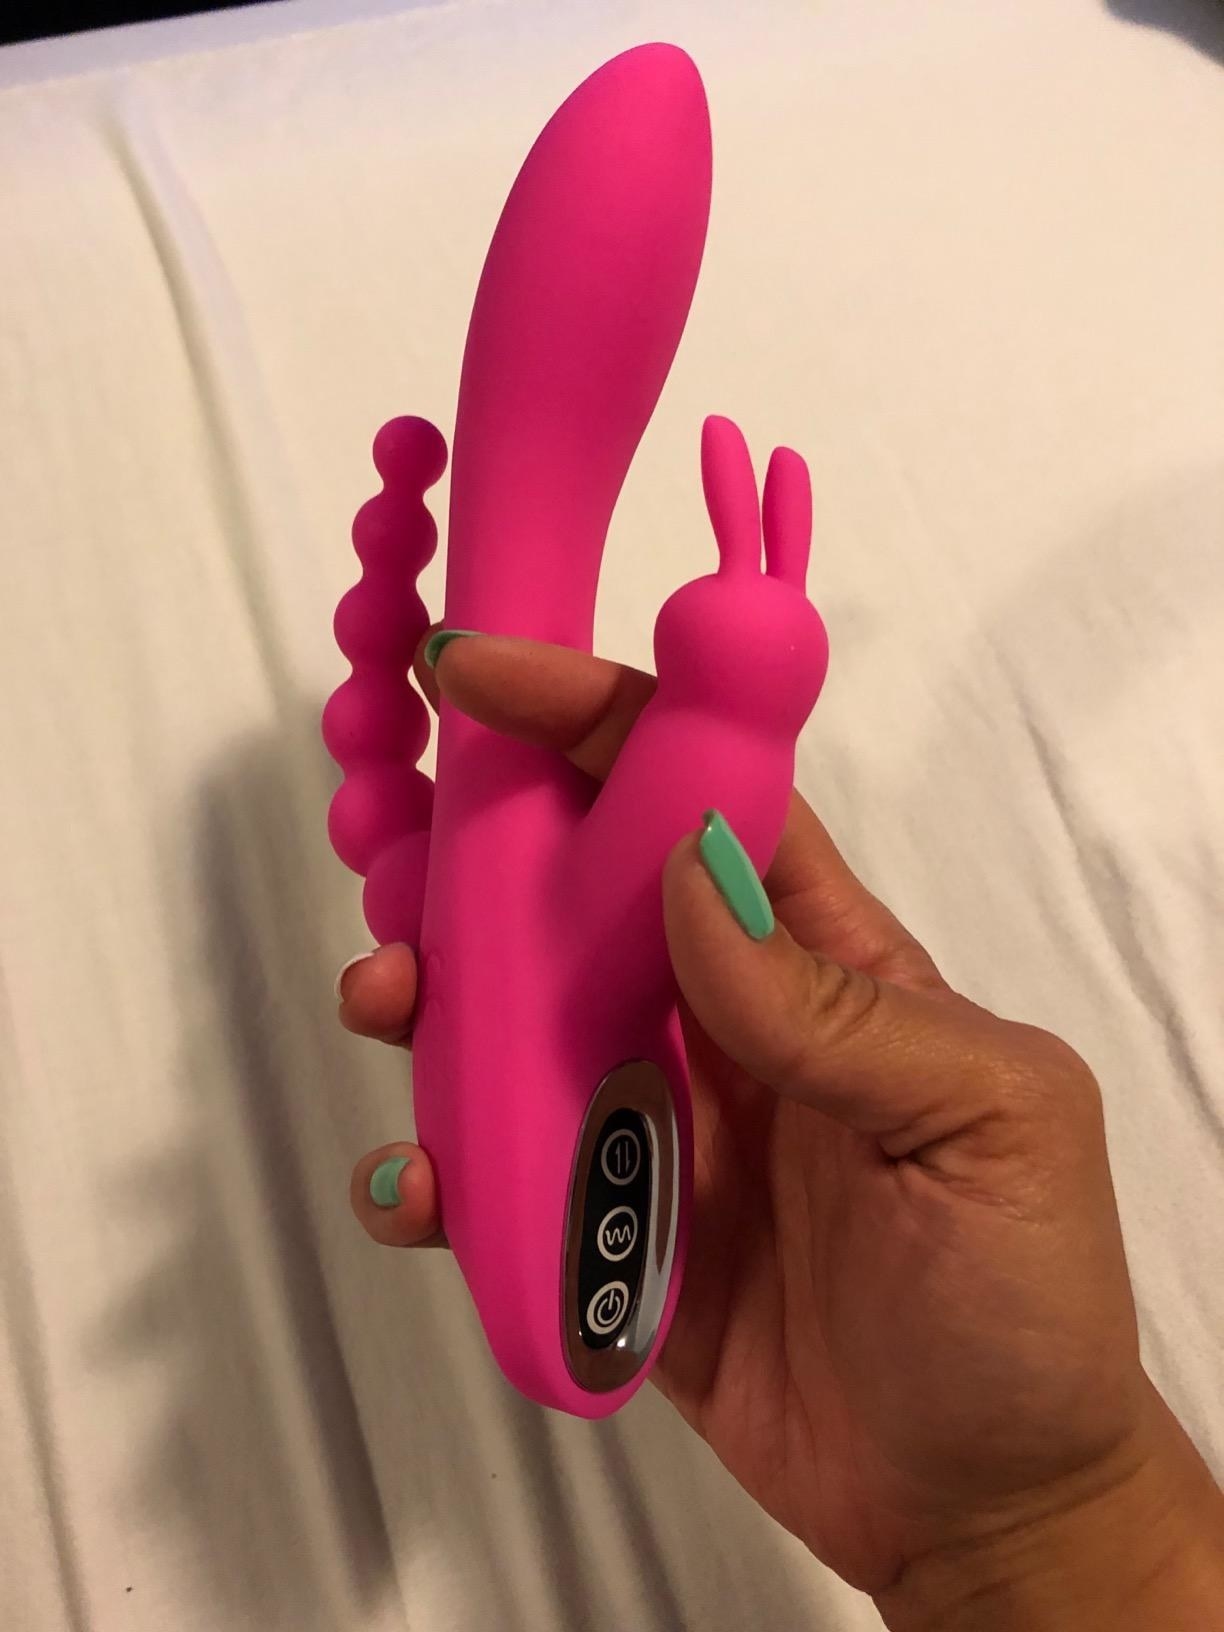 Model holding pink three-in-one rabbit vibrator to display clitoral stimulator, shaft and 